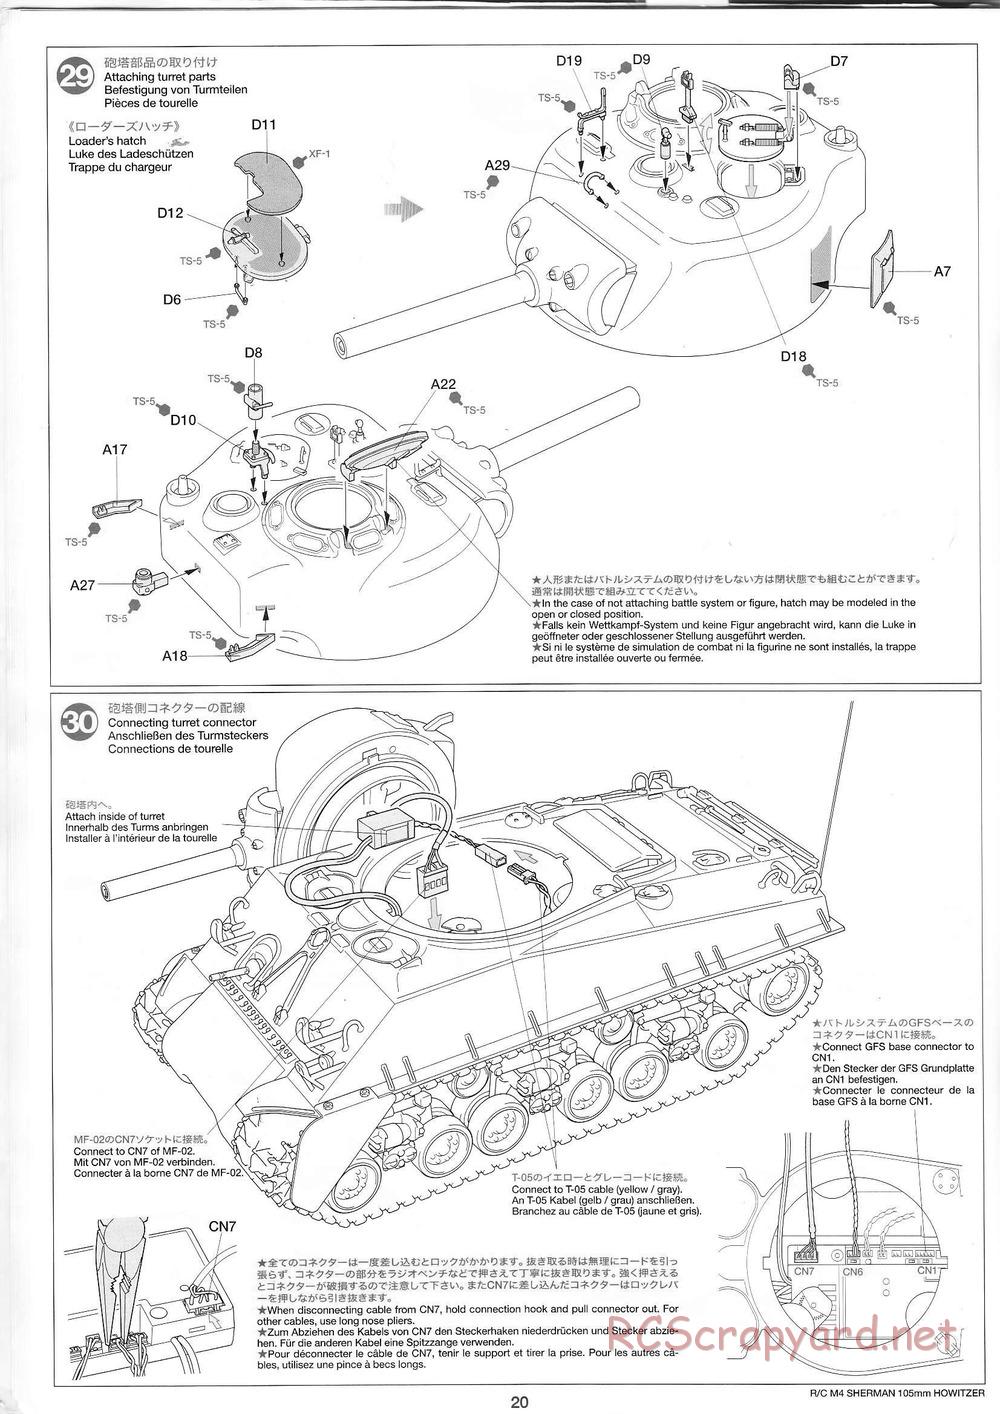 Tamiya - M4 Sherman 105mm Howitzer - 1/16 Scale Chassis - Manual - Page 20